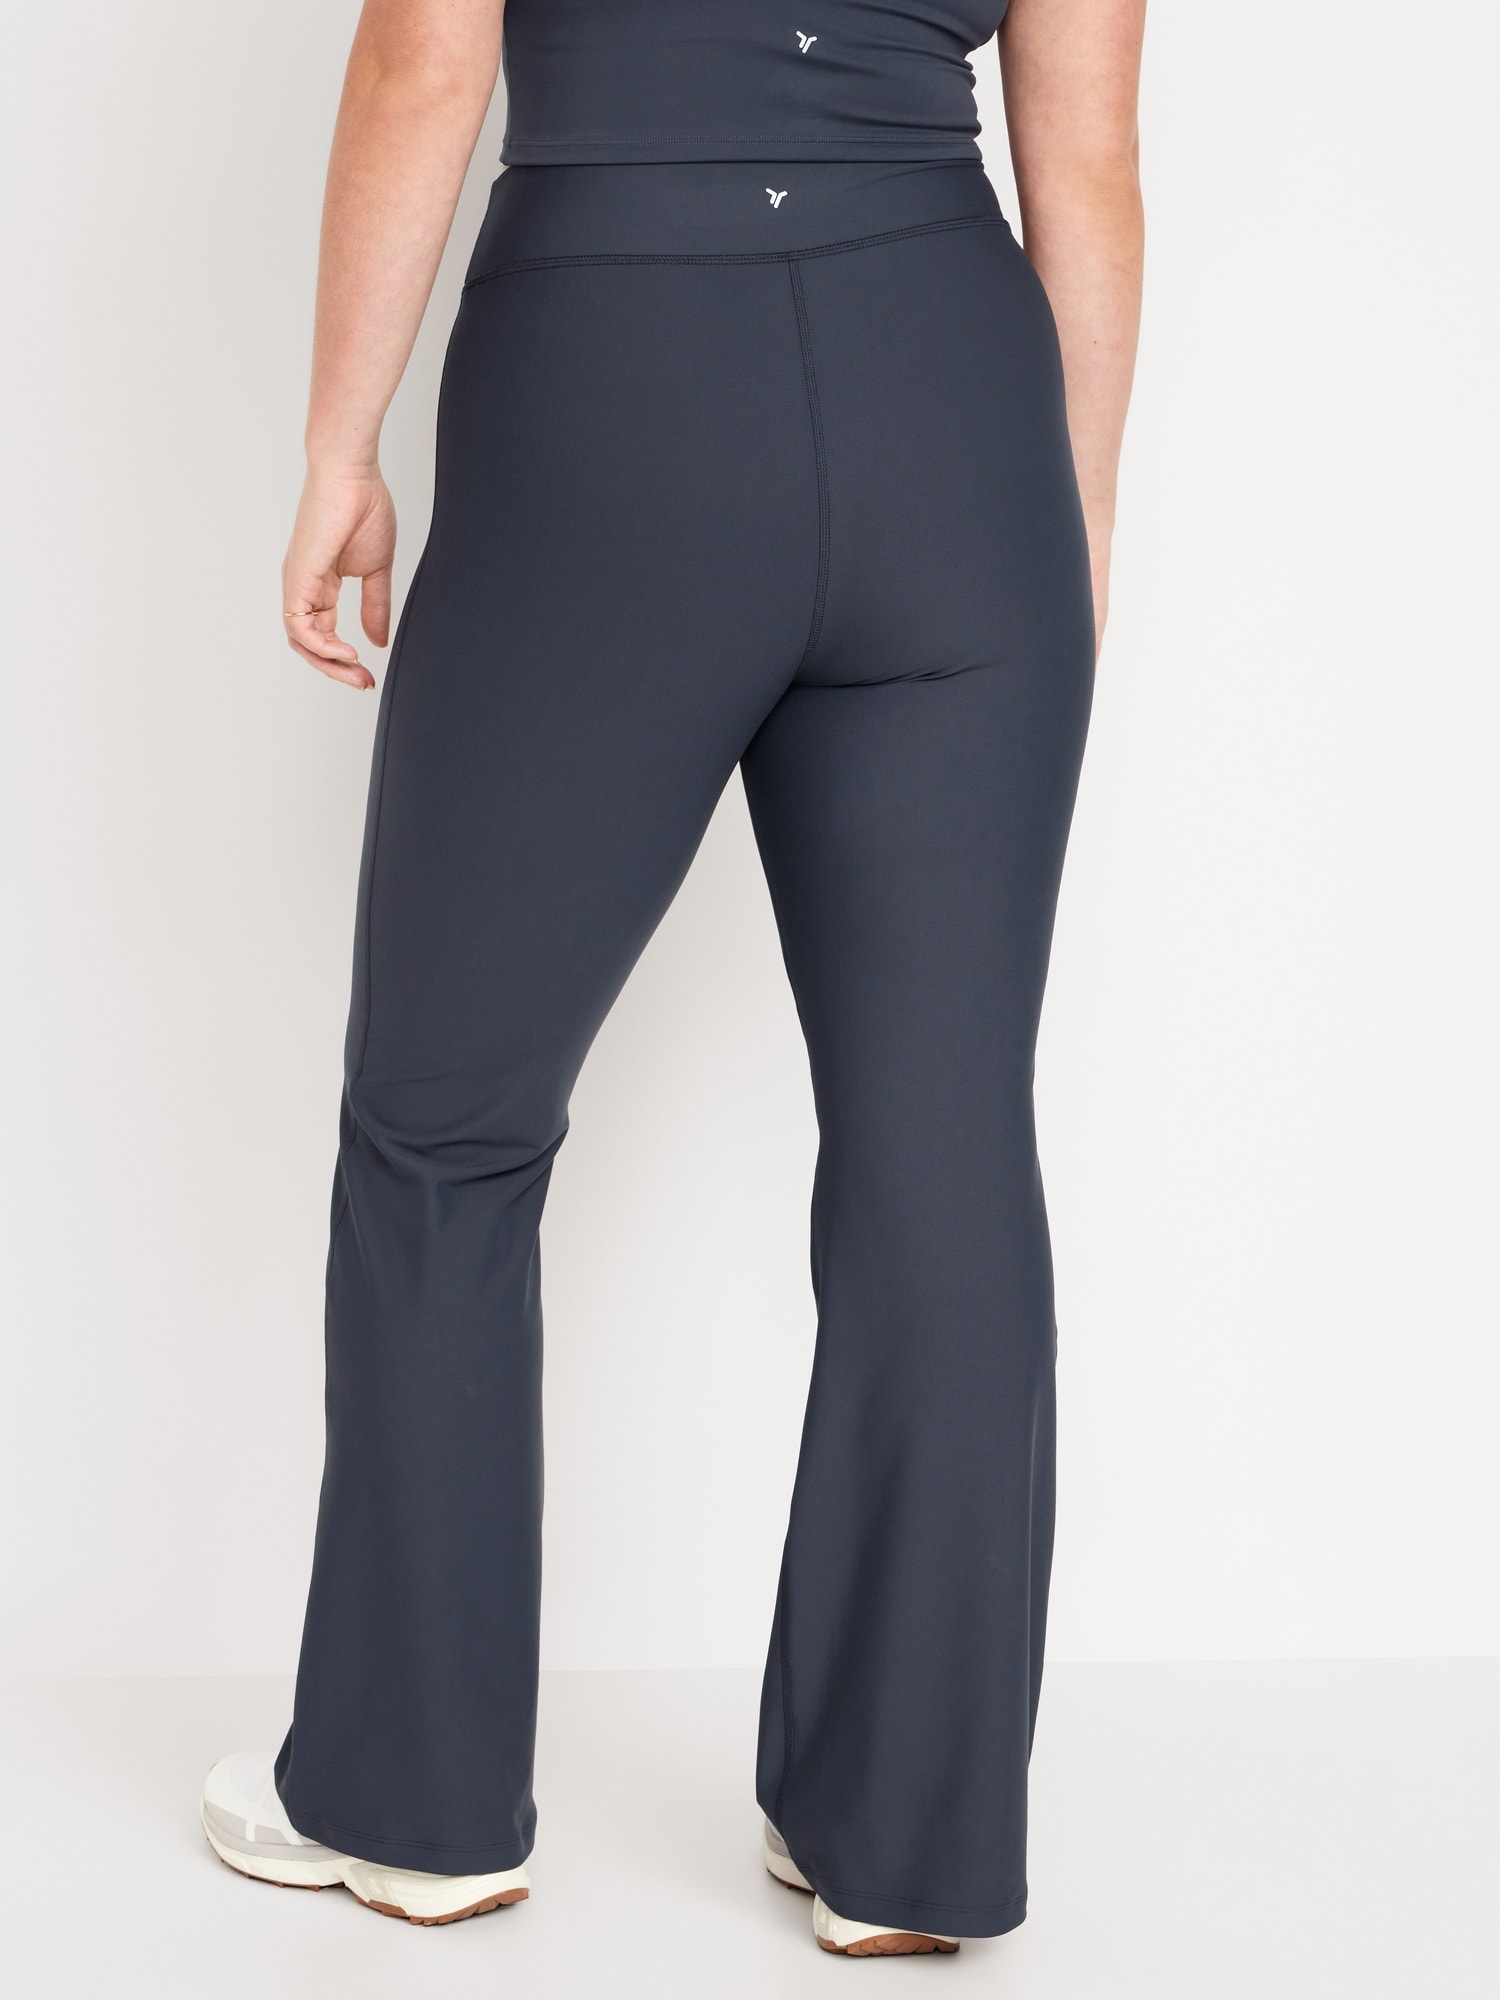 🆕 Old Navy Women’s PowerSoft Extra High-Waisted Leggings 4X